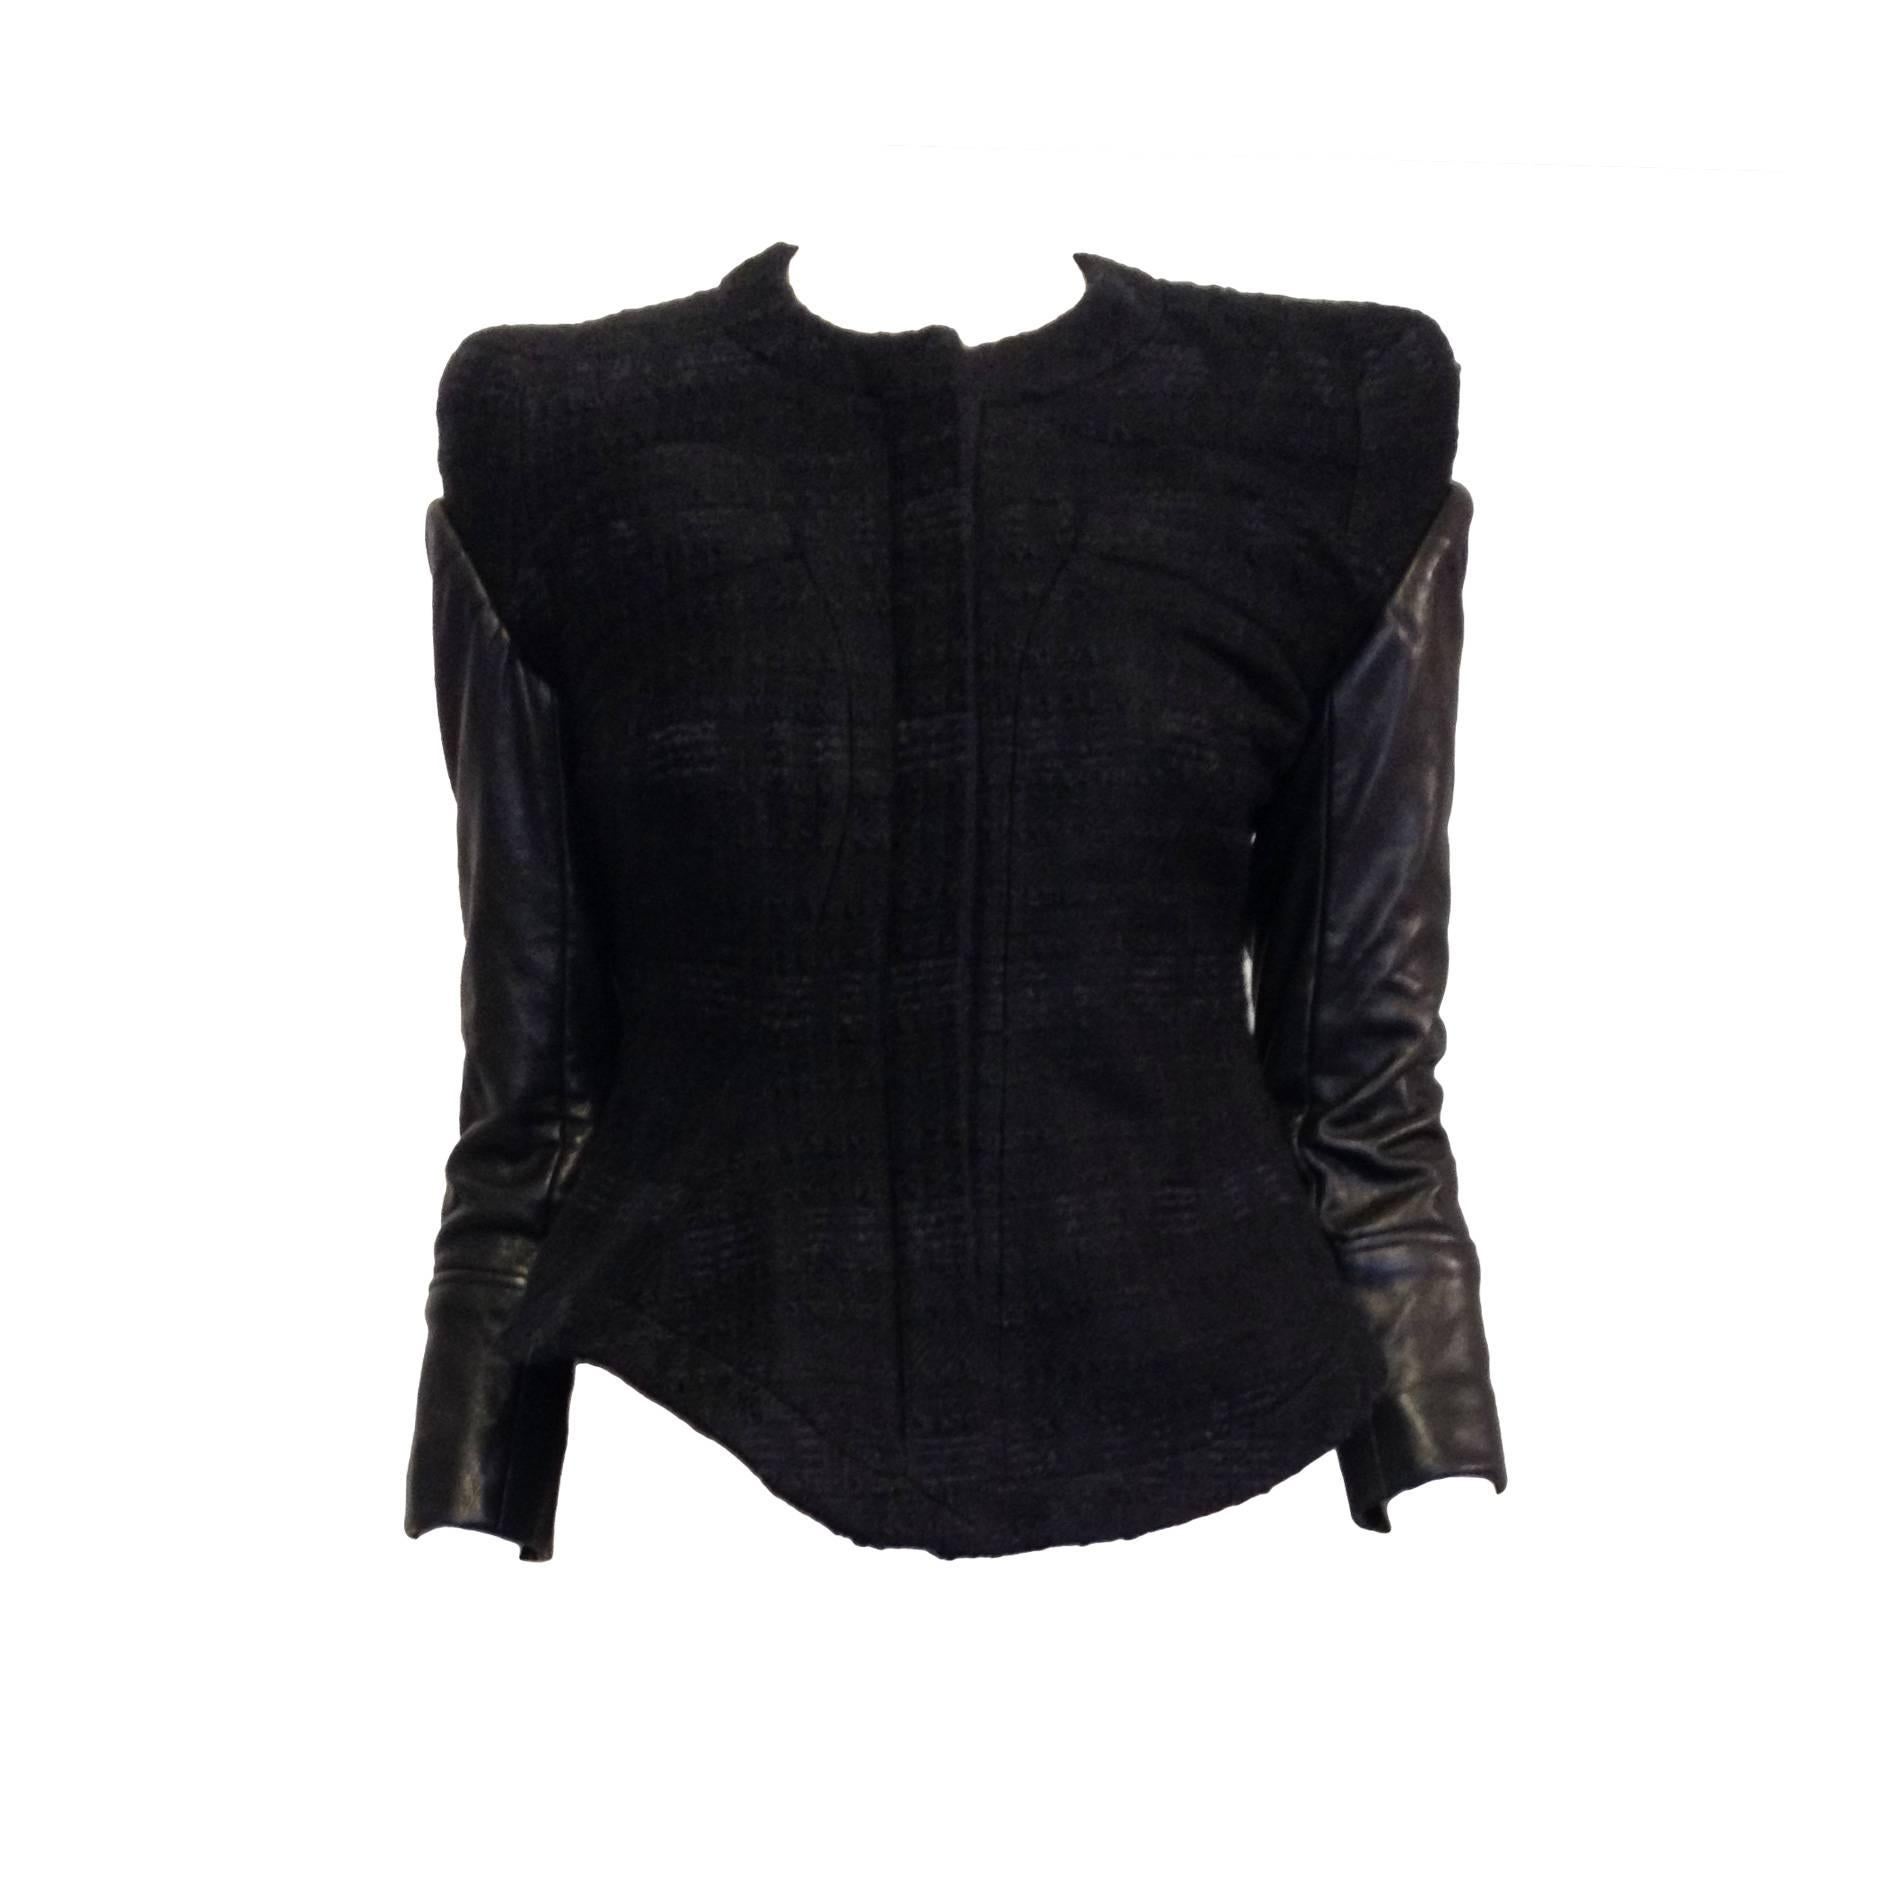 Givenchy Black Tweed Jacket with Leather Sleeves